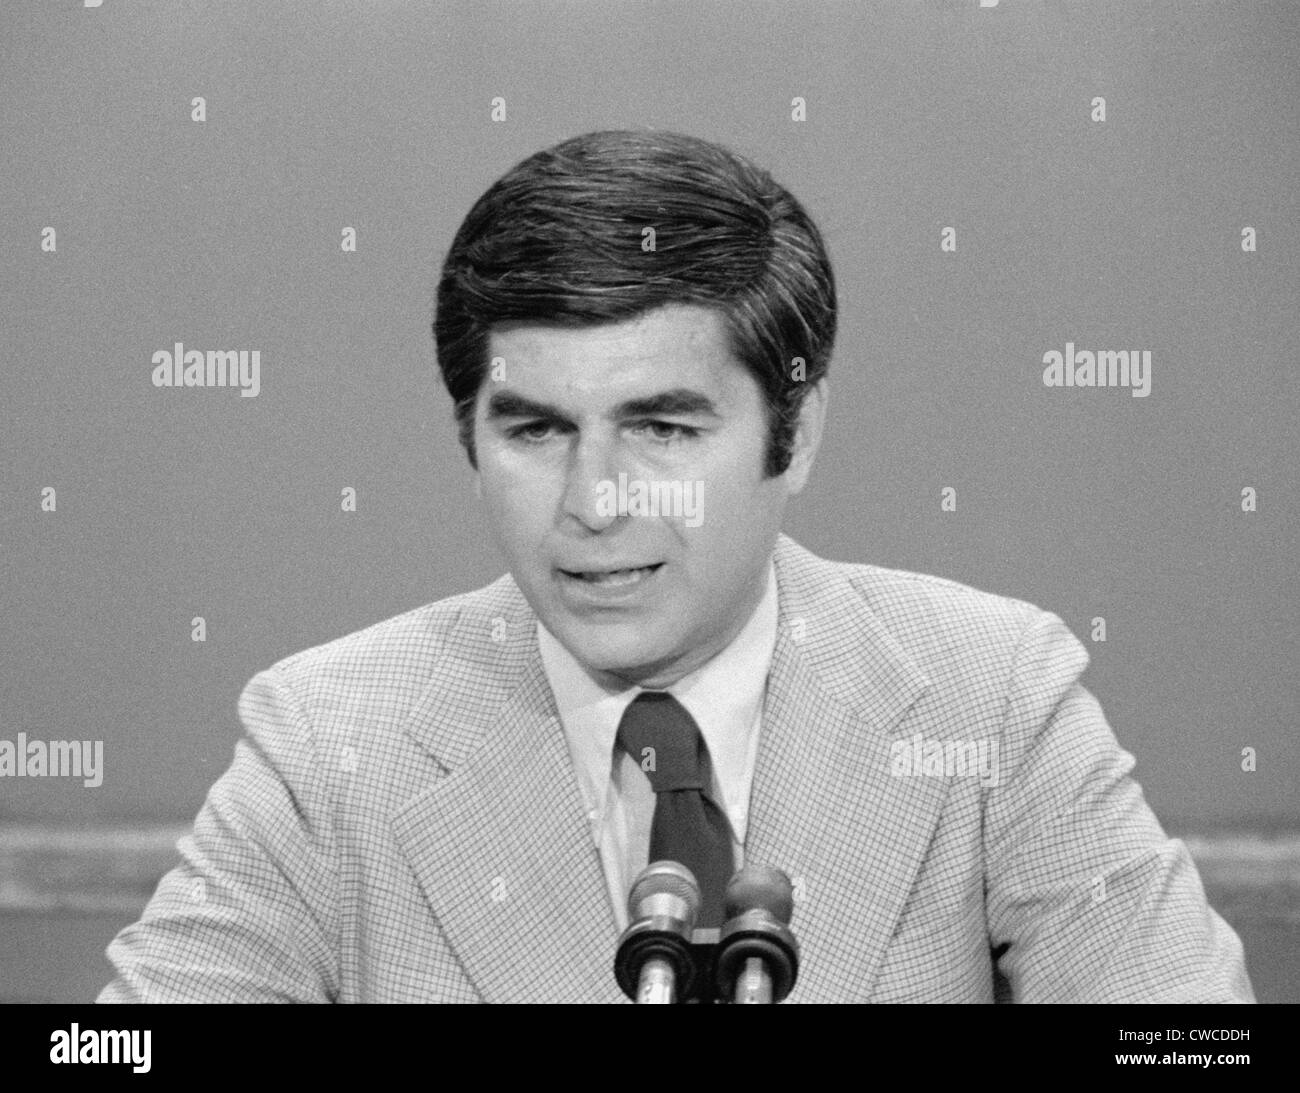 Michael Dukakis, then governor of Massachusetts speaking at the 1976 Democratic National Convention. Stock Photo